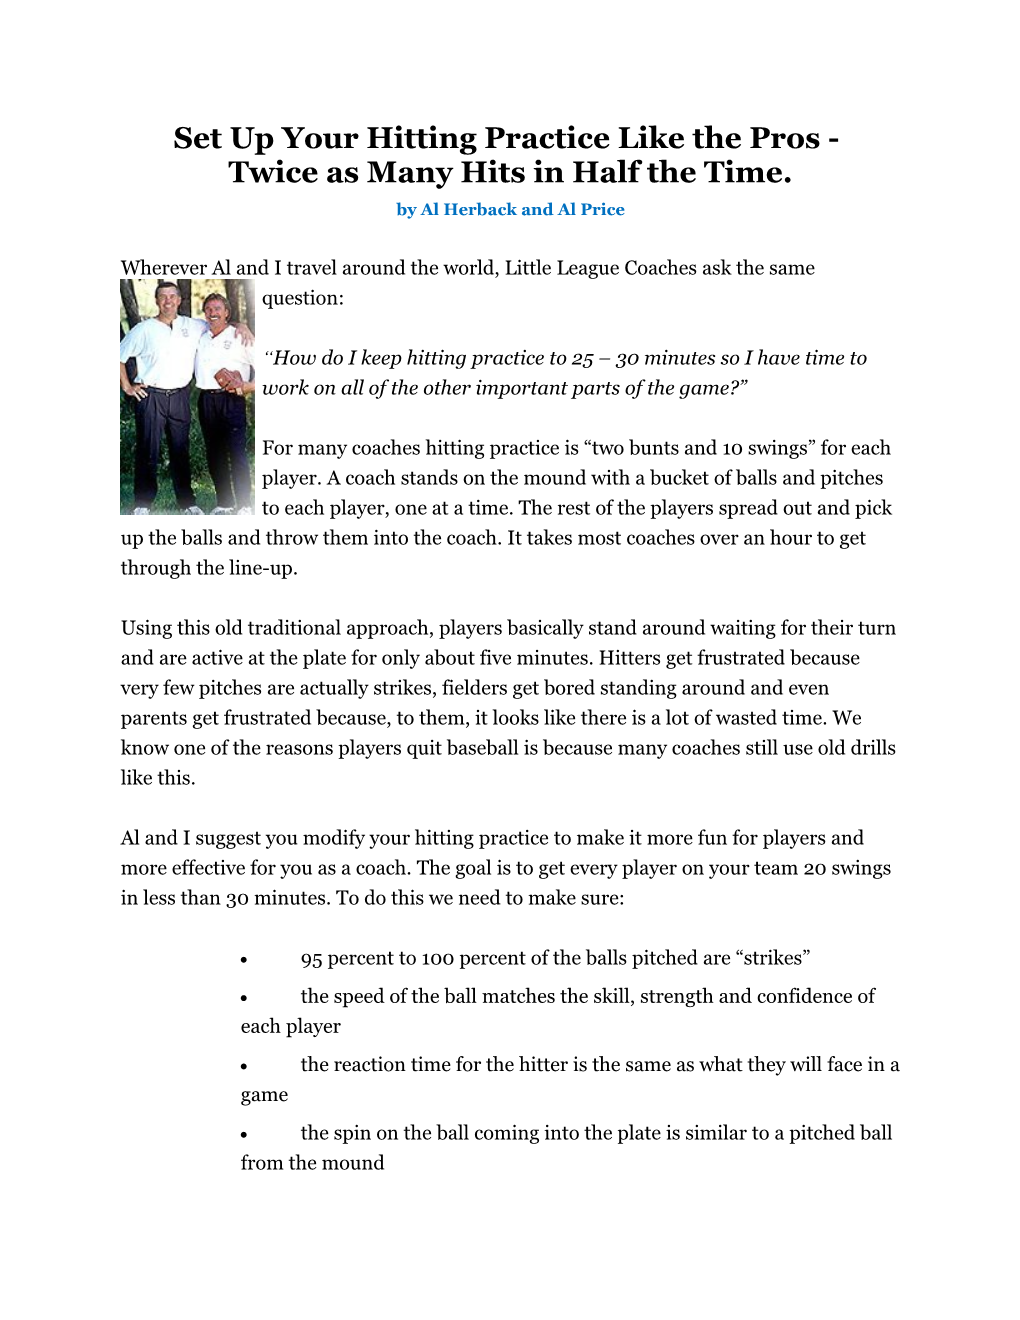 Set up Your Hitting Practice Like the Pros - Twice As Many Hits in Half the Time. by Al